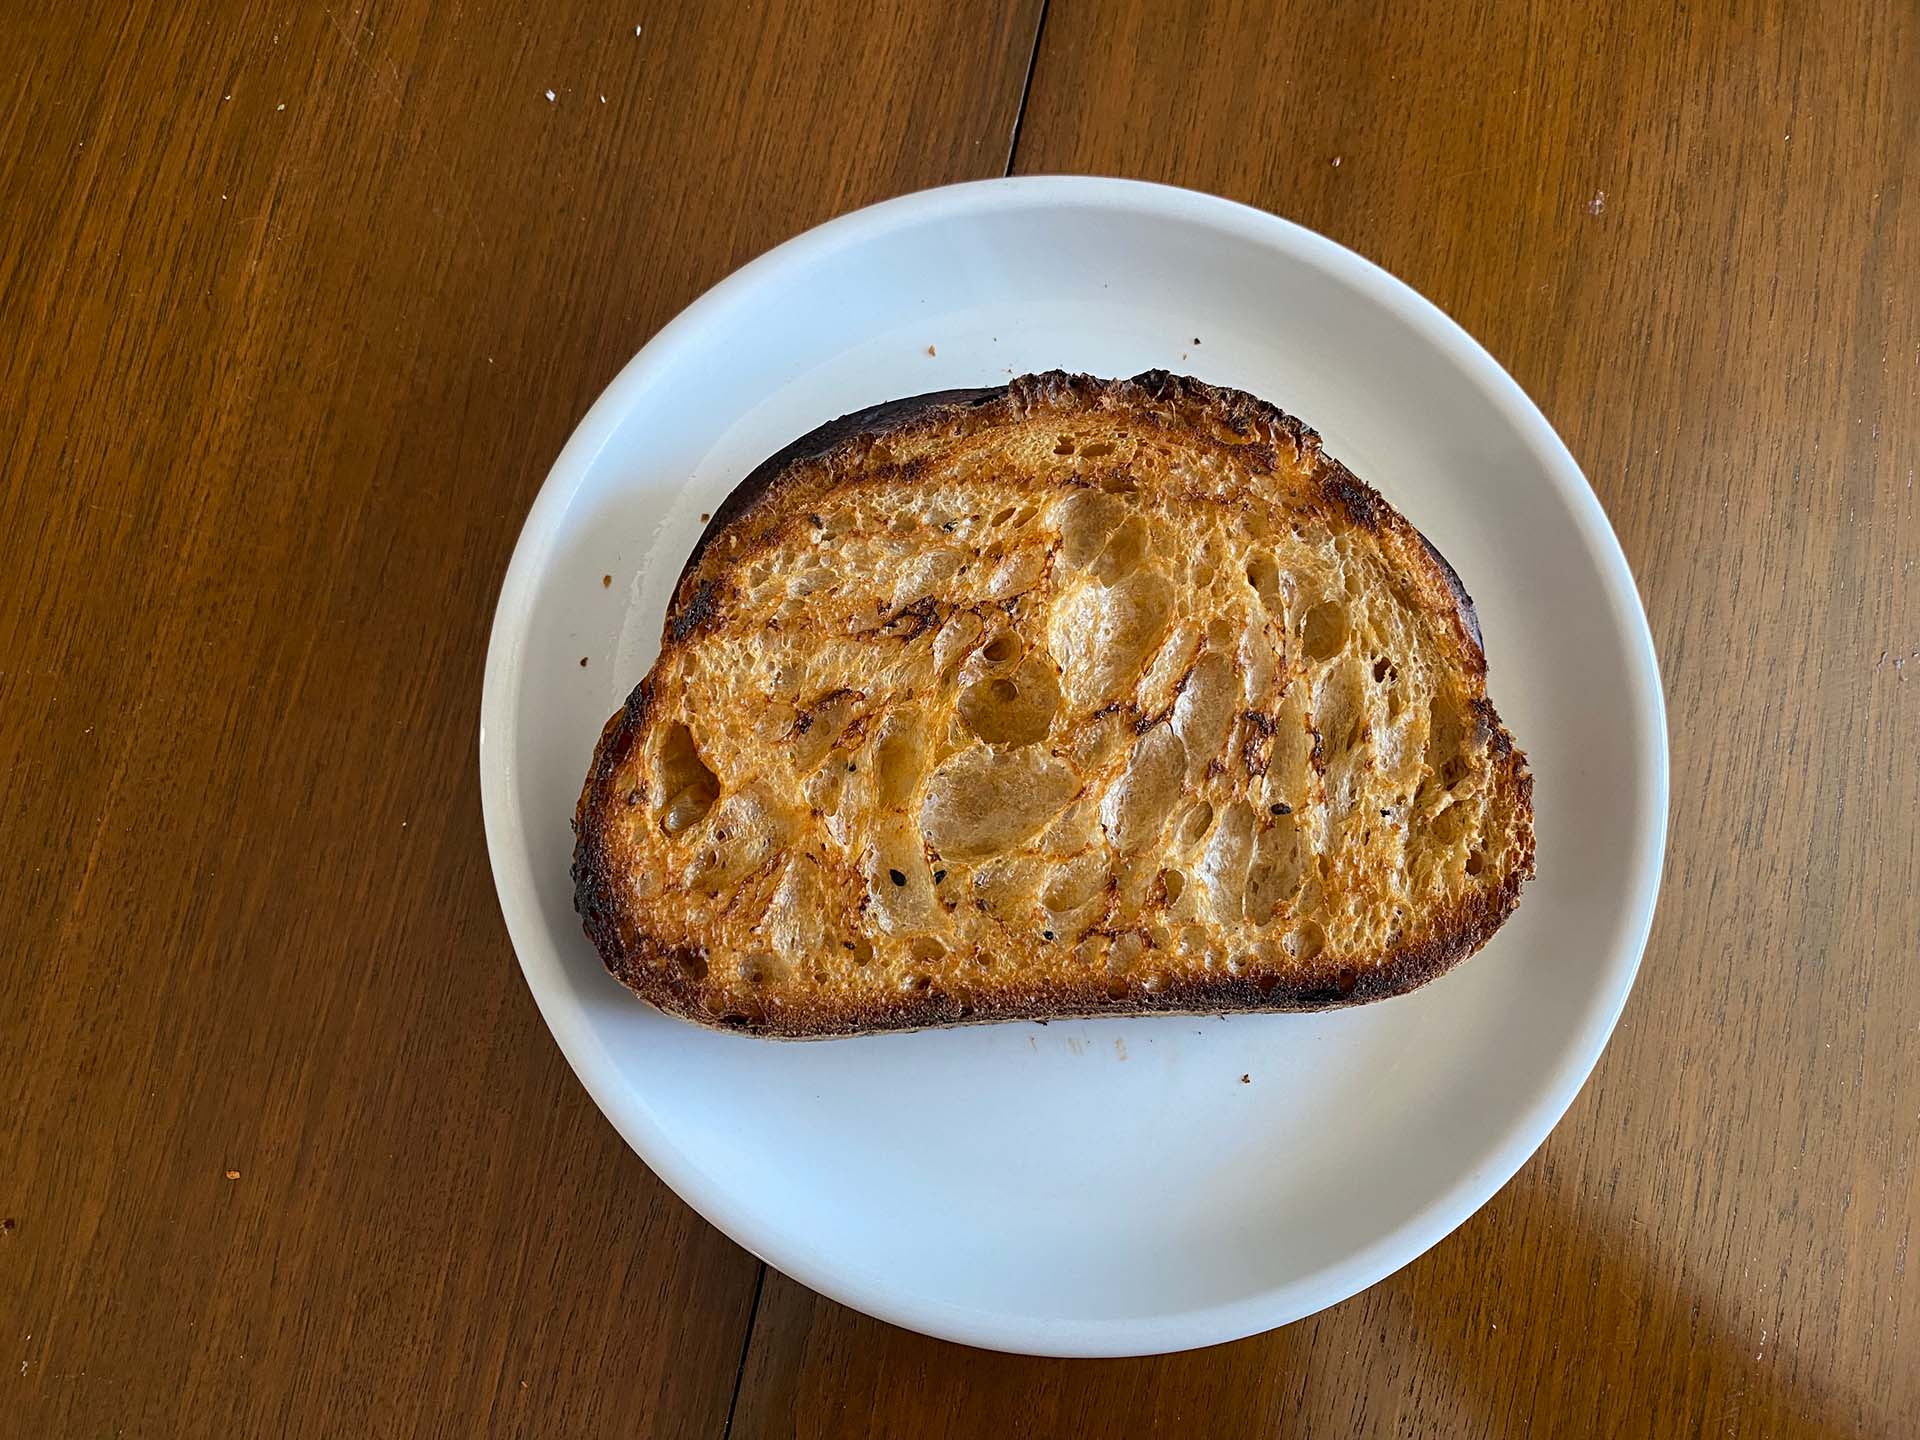 A slice of toasted sourdough bread on a white plate.